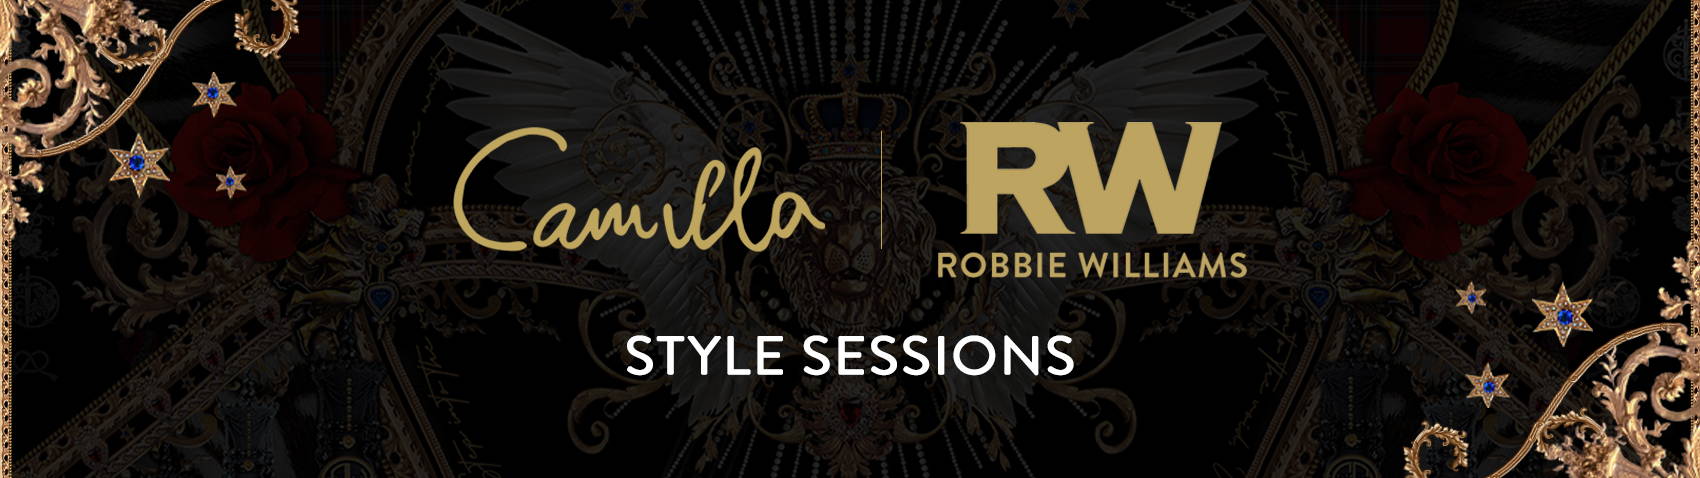 CAMILLA X Robbie Williams | Style Sessions | Watch & Shop Now | Shoppable Video